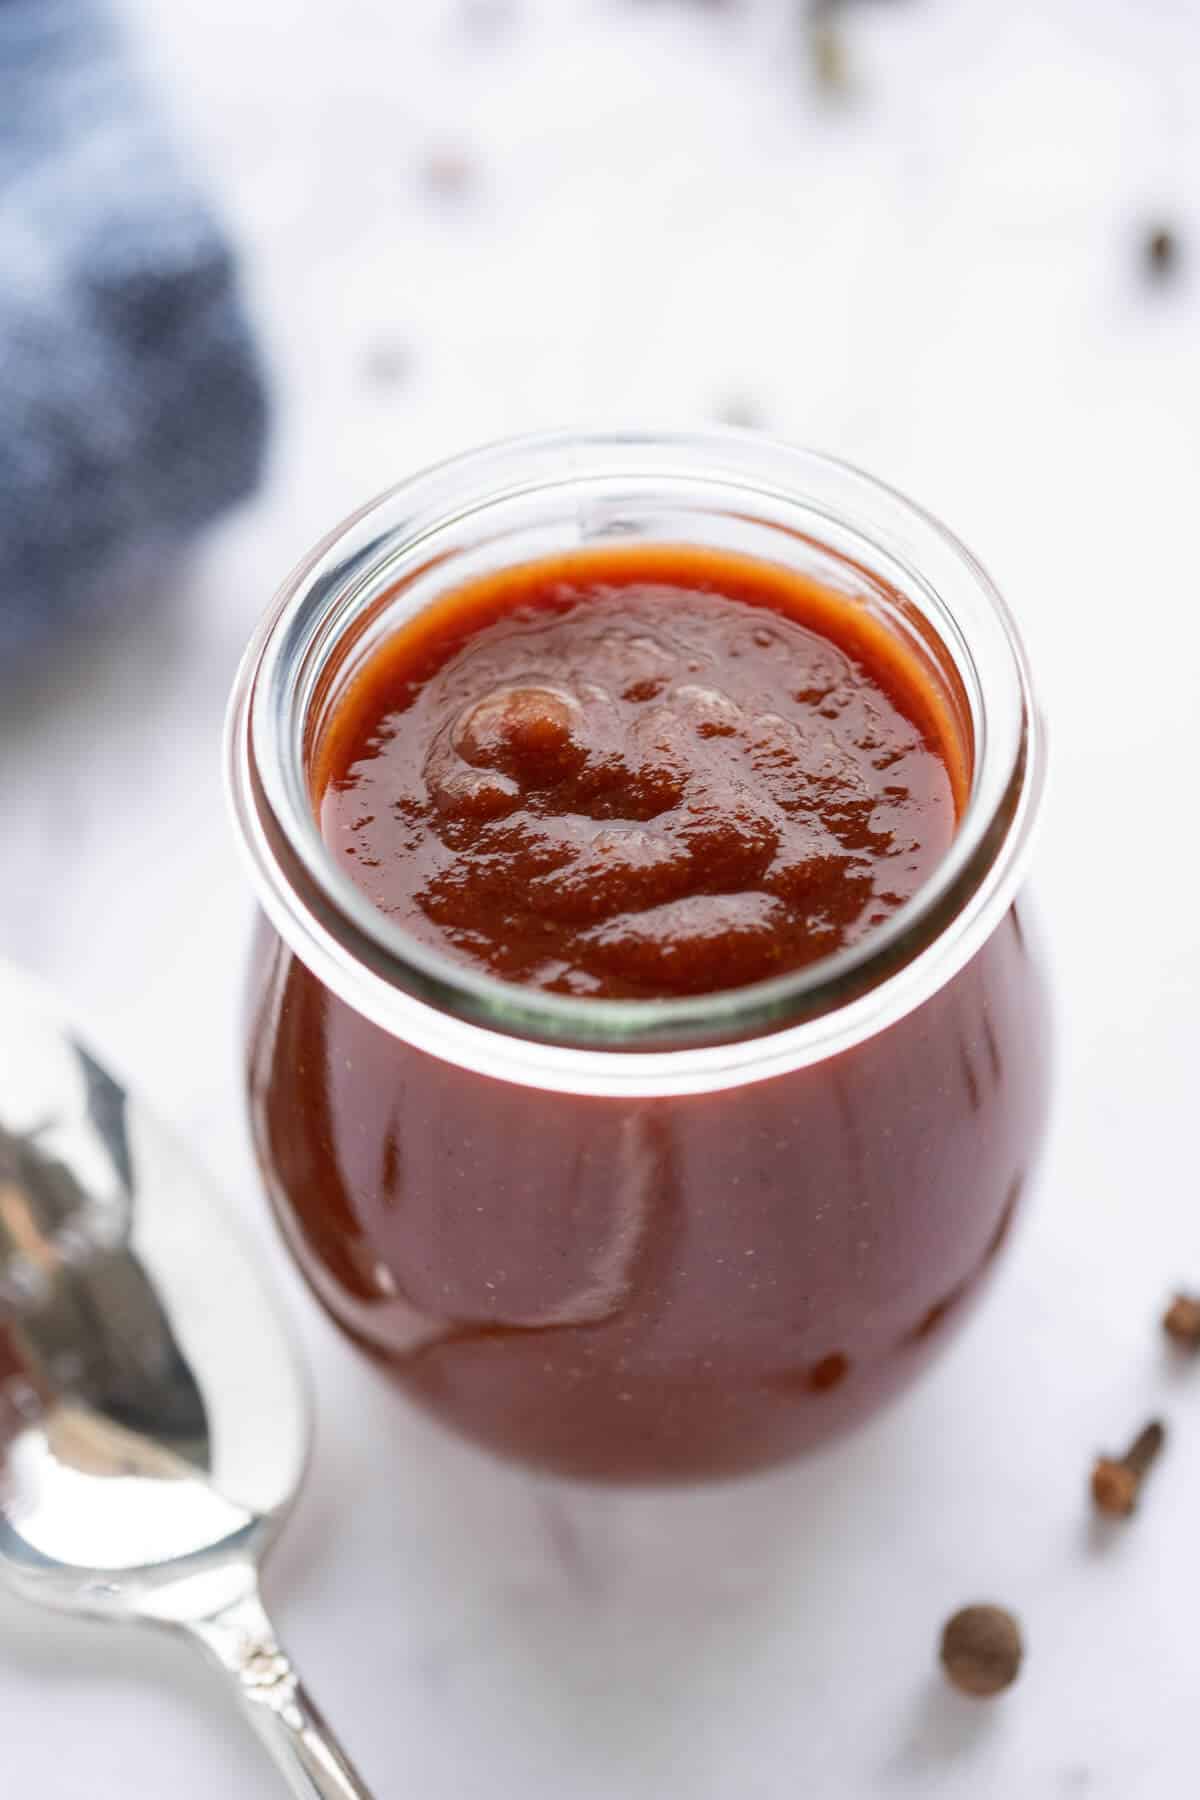 Sugar free barbecue sauce in a glass Weck jar with a spoon beside it. Blue napkin in the background, allspice and peppercorns in the foreground.